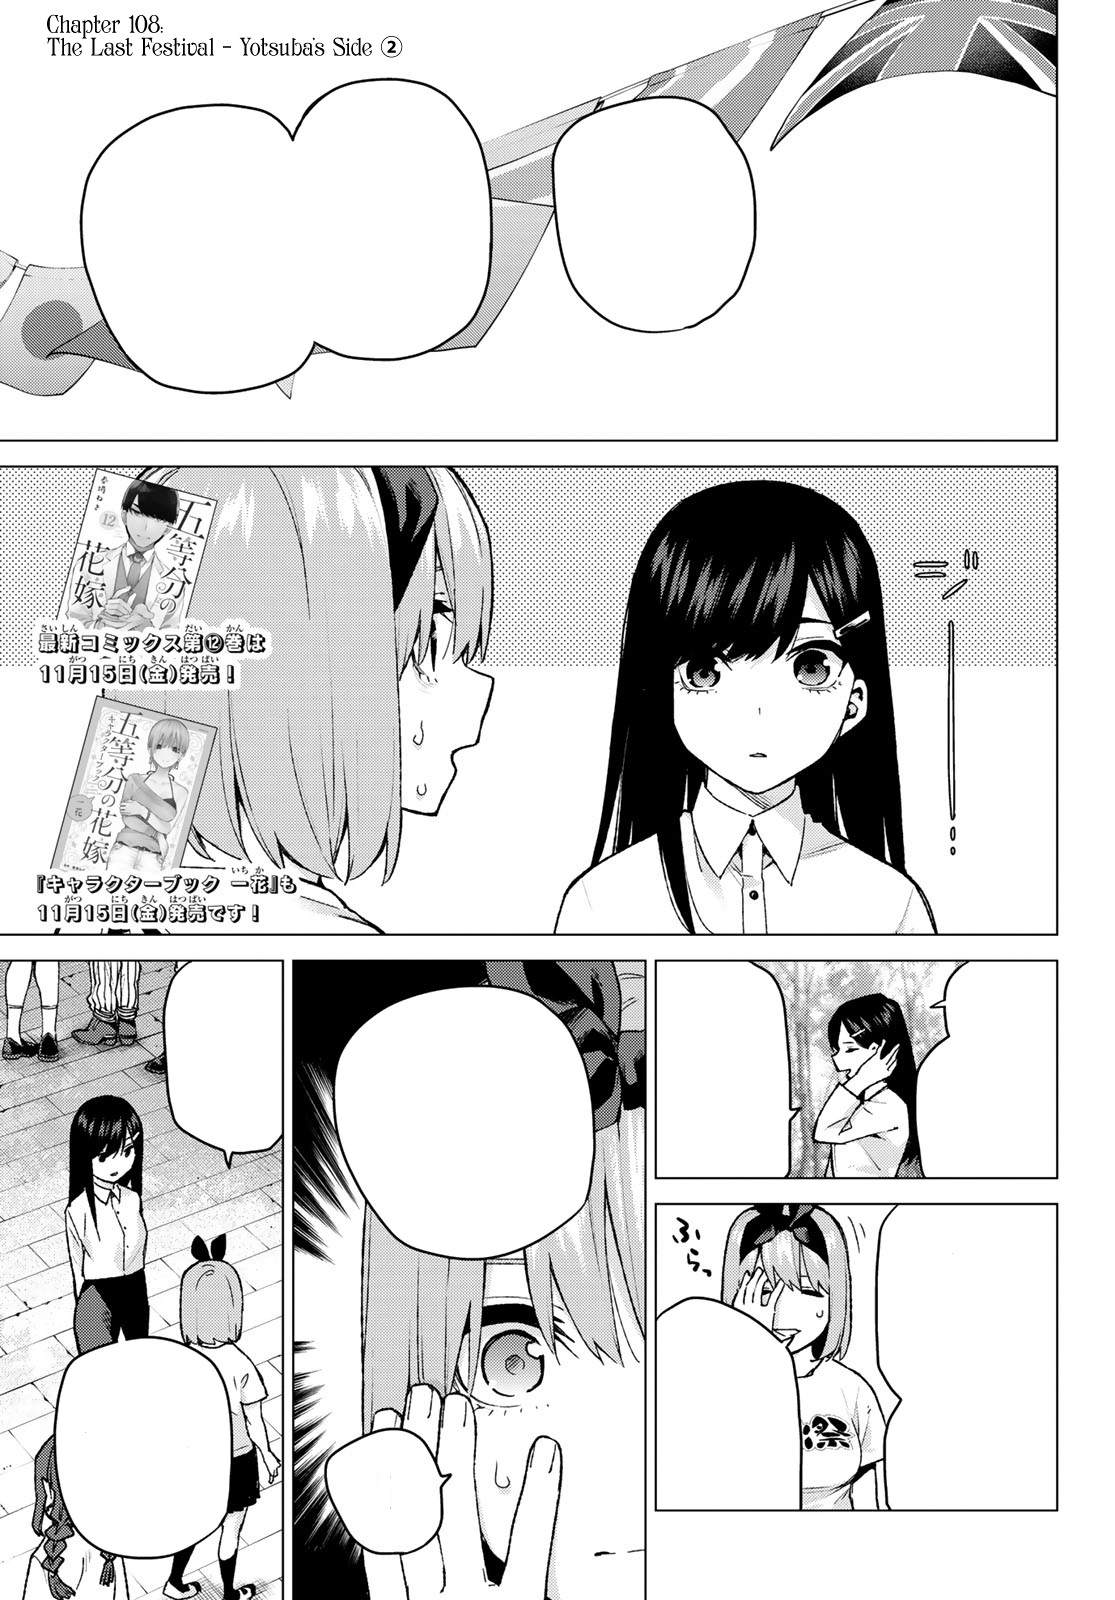 The Quintessential Quintuplets, Chapter 15 - The Quintessential